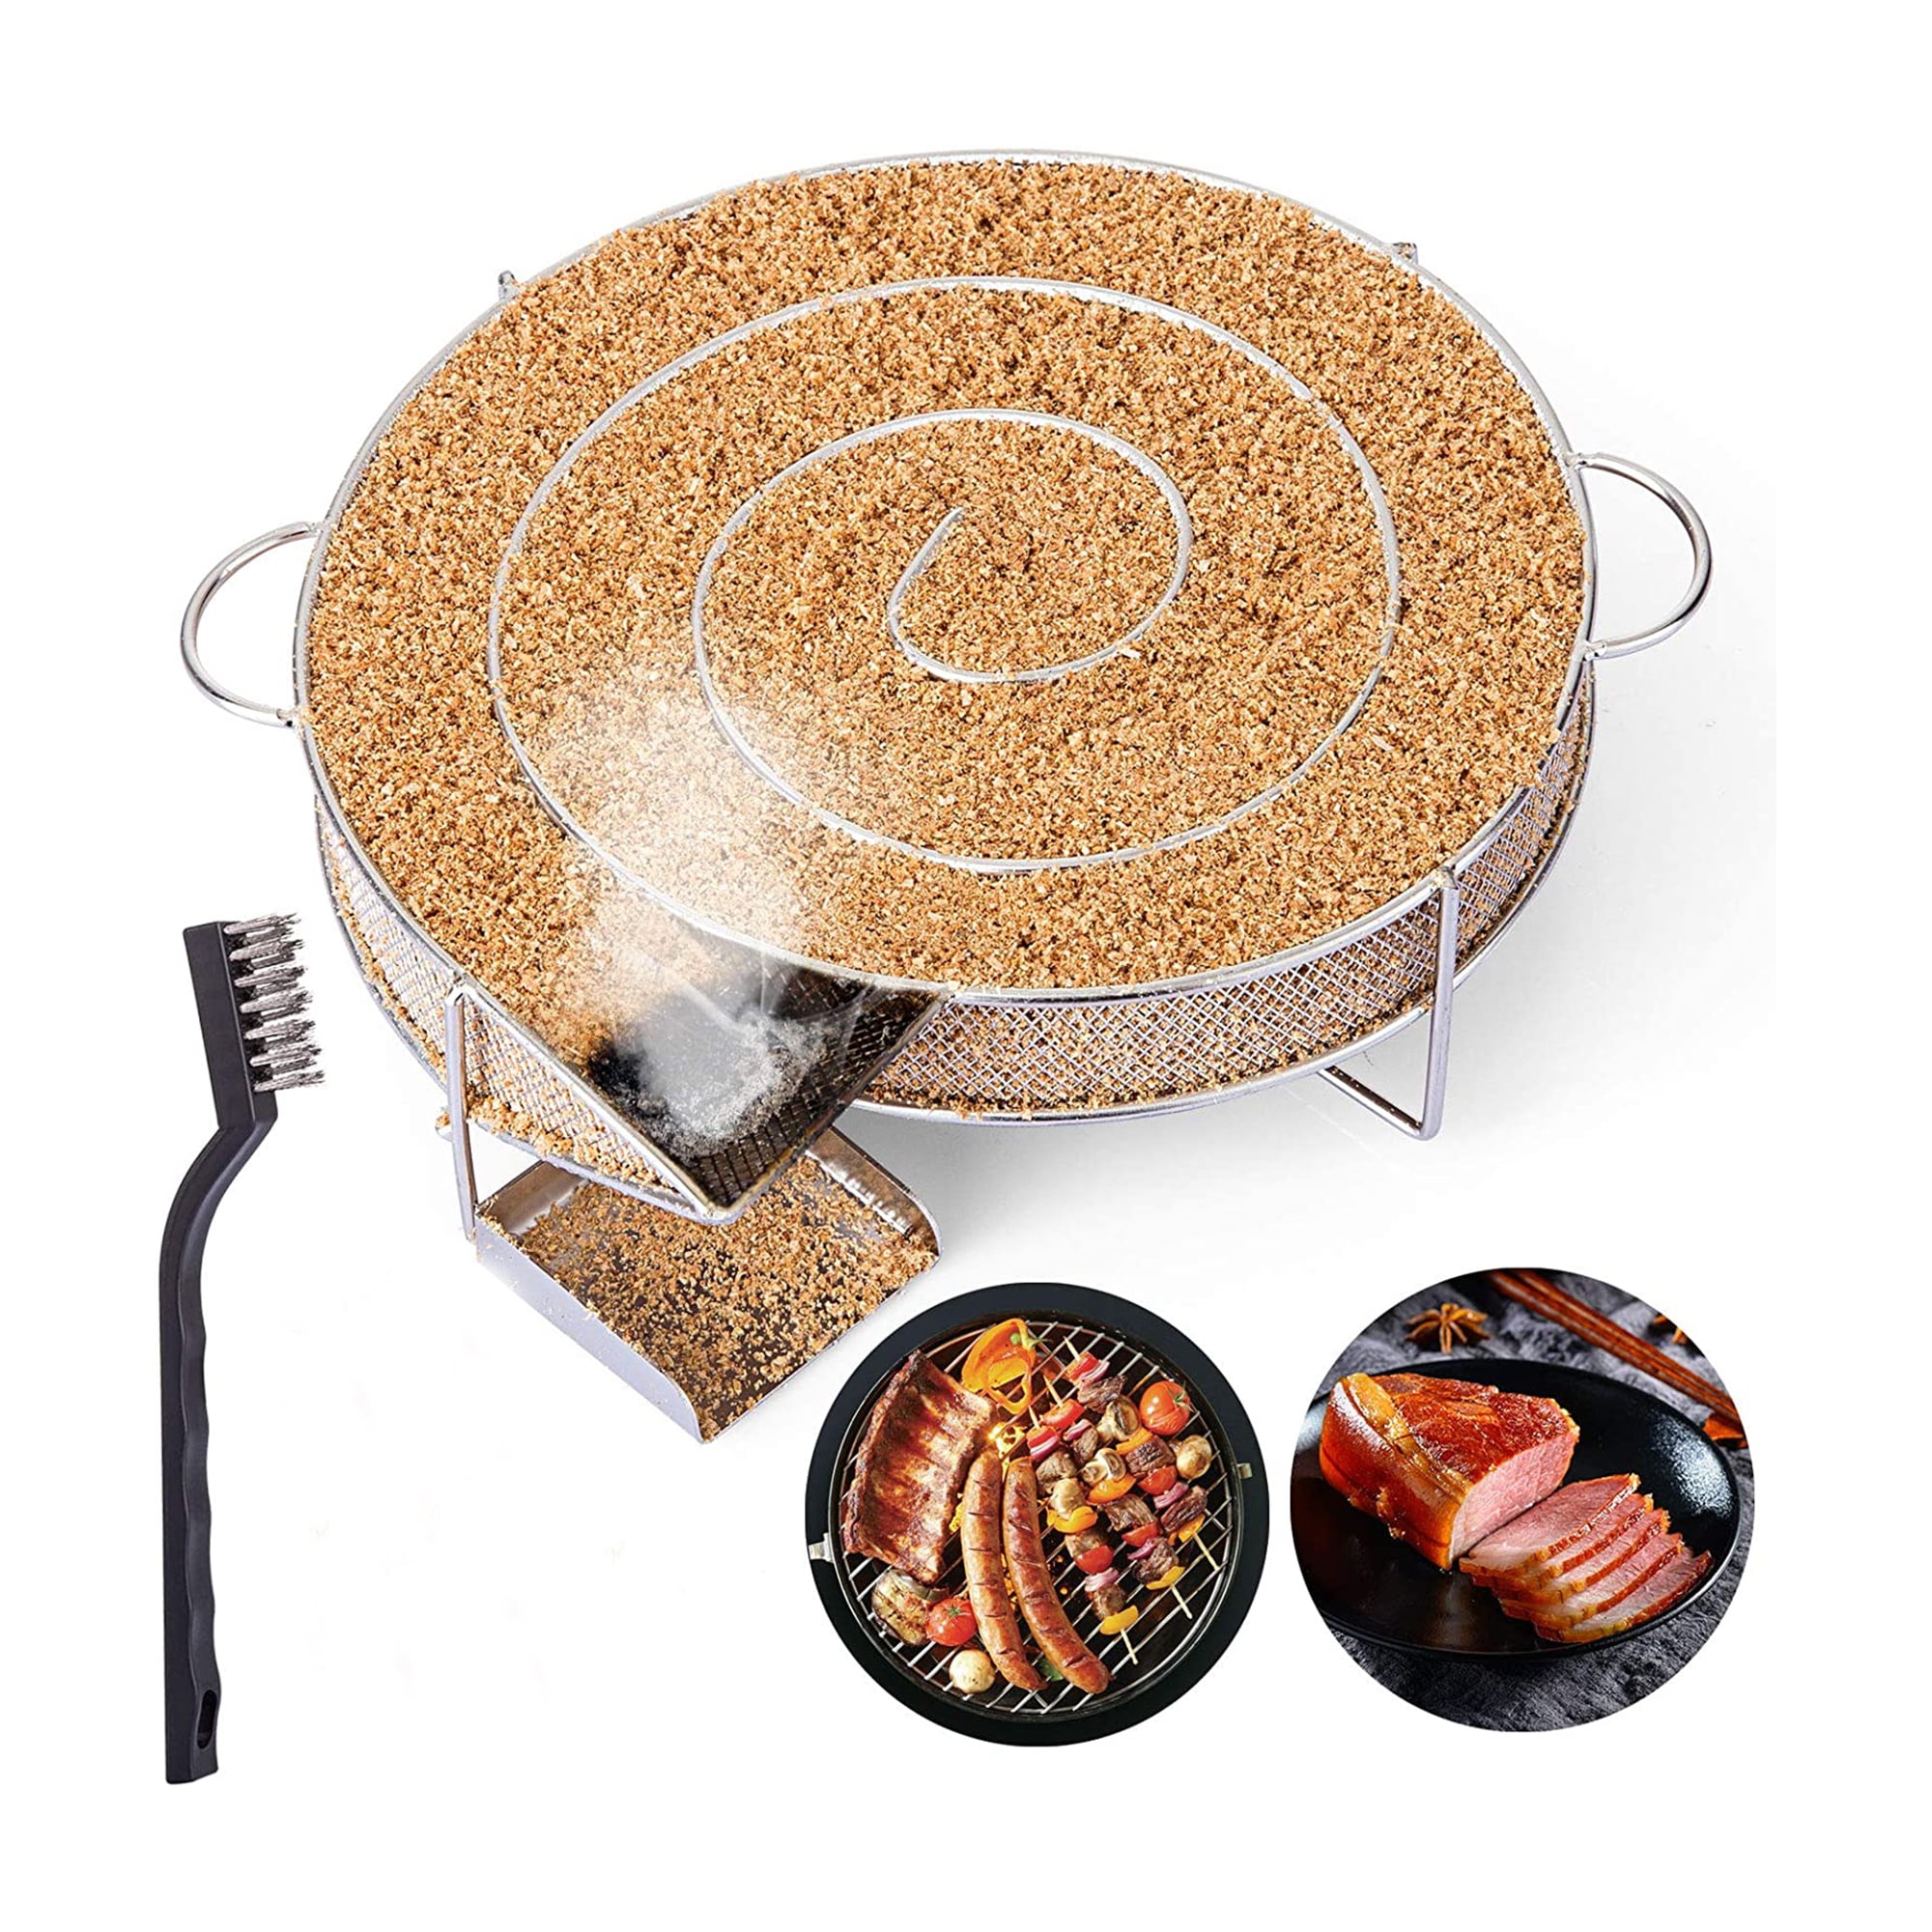 Cold Smoke Generator Round Stainless Smoker Tray for Barbecue Bacon Fish Meat Pork Cheese Meat, Hot or Cold Smoking on Grill & Smoker - Walmart.com